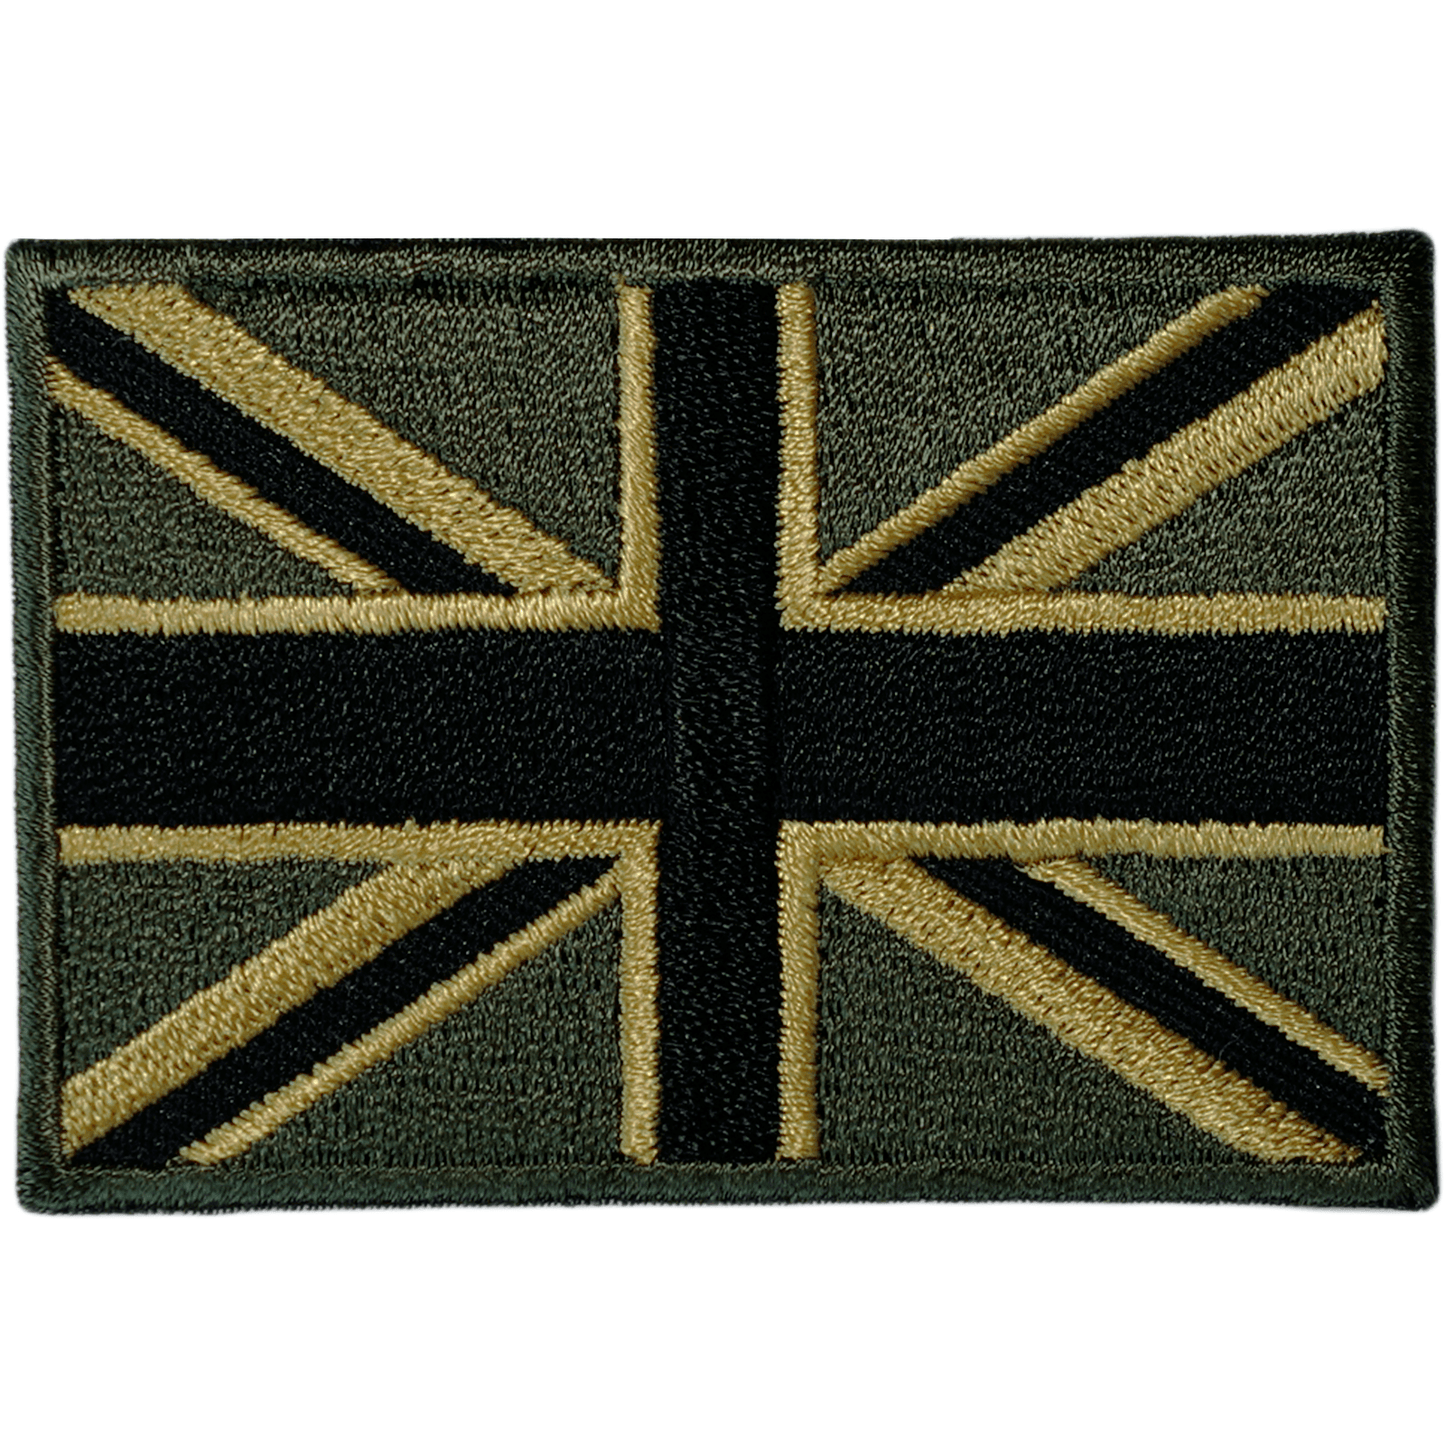 Green UK Flag Patch Iron Sew On Union Jack United Kingdom Army Embroidered Badge